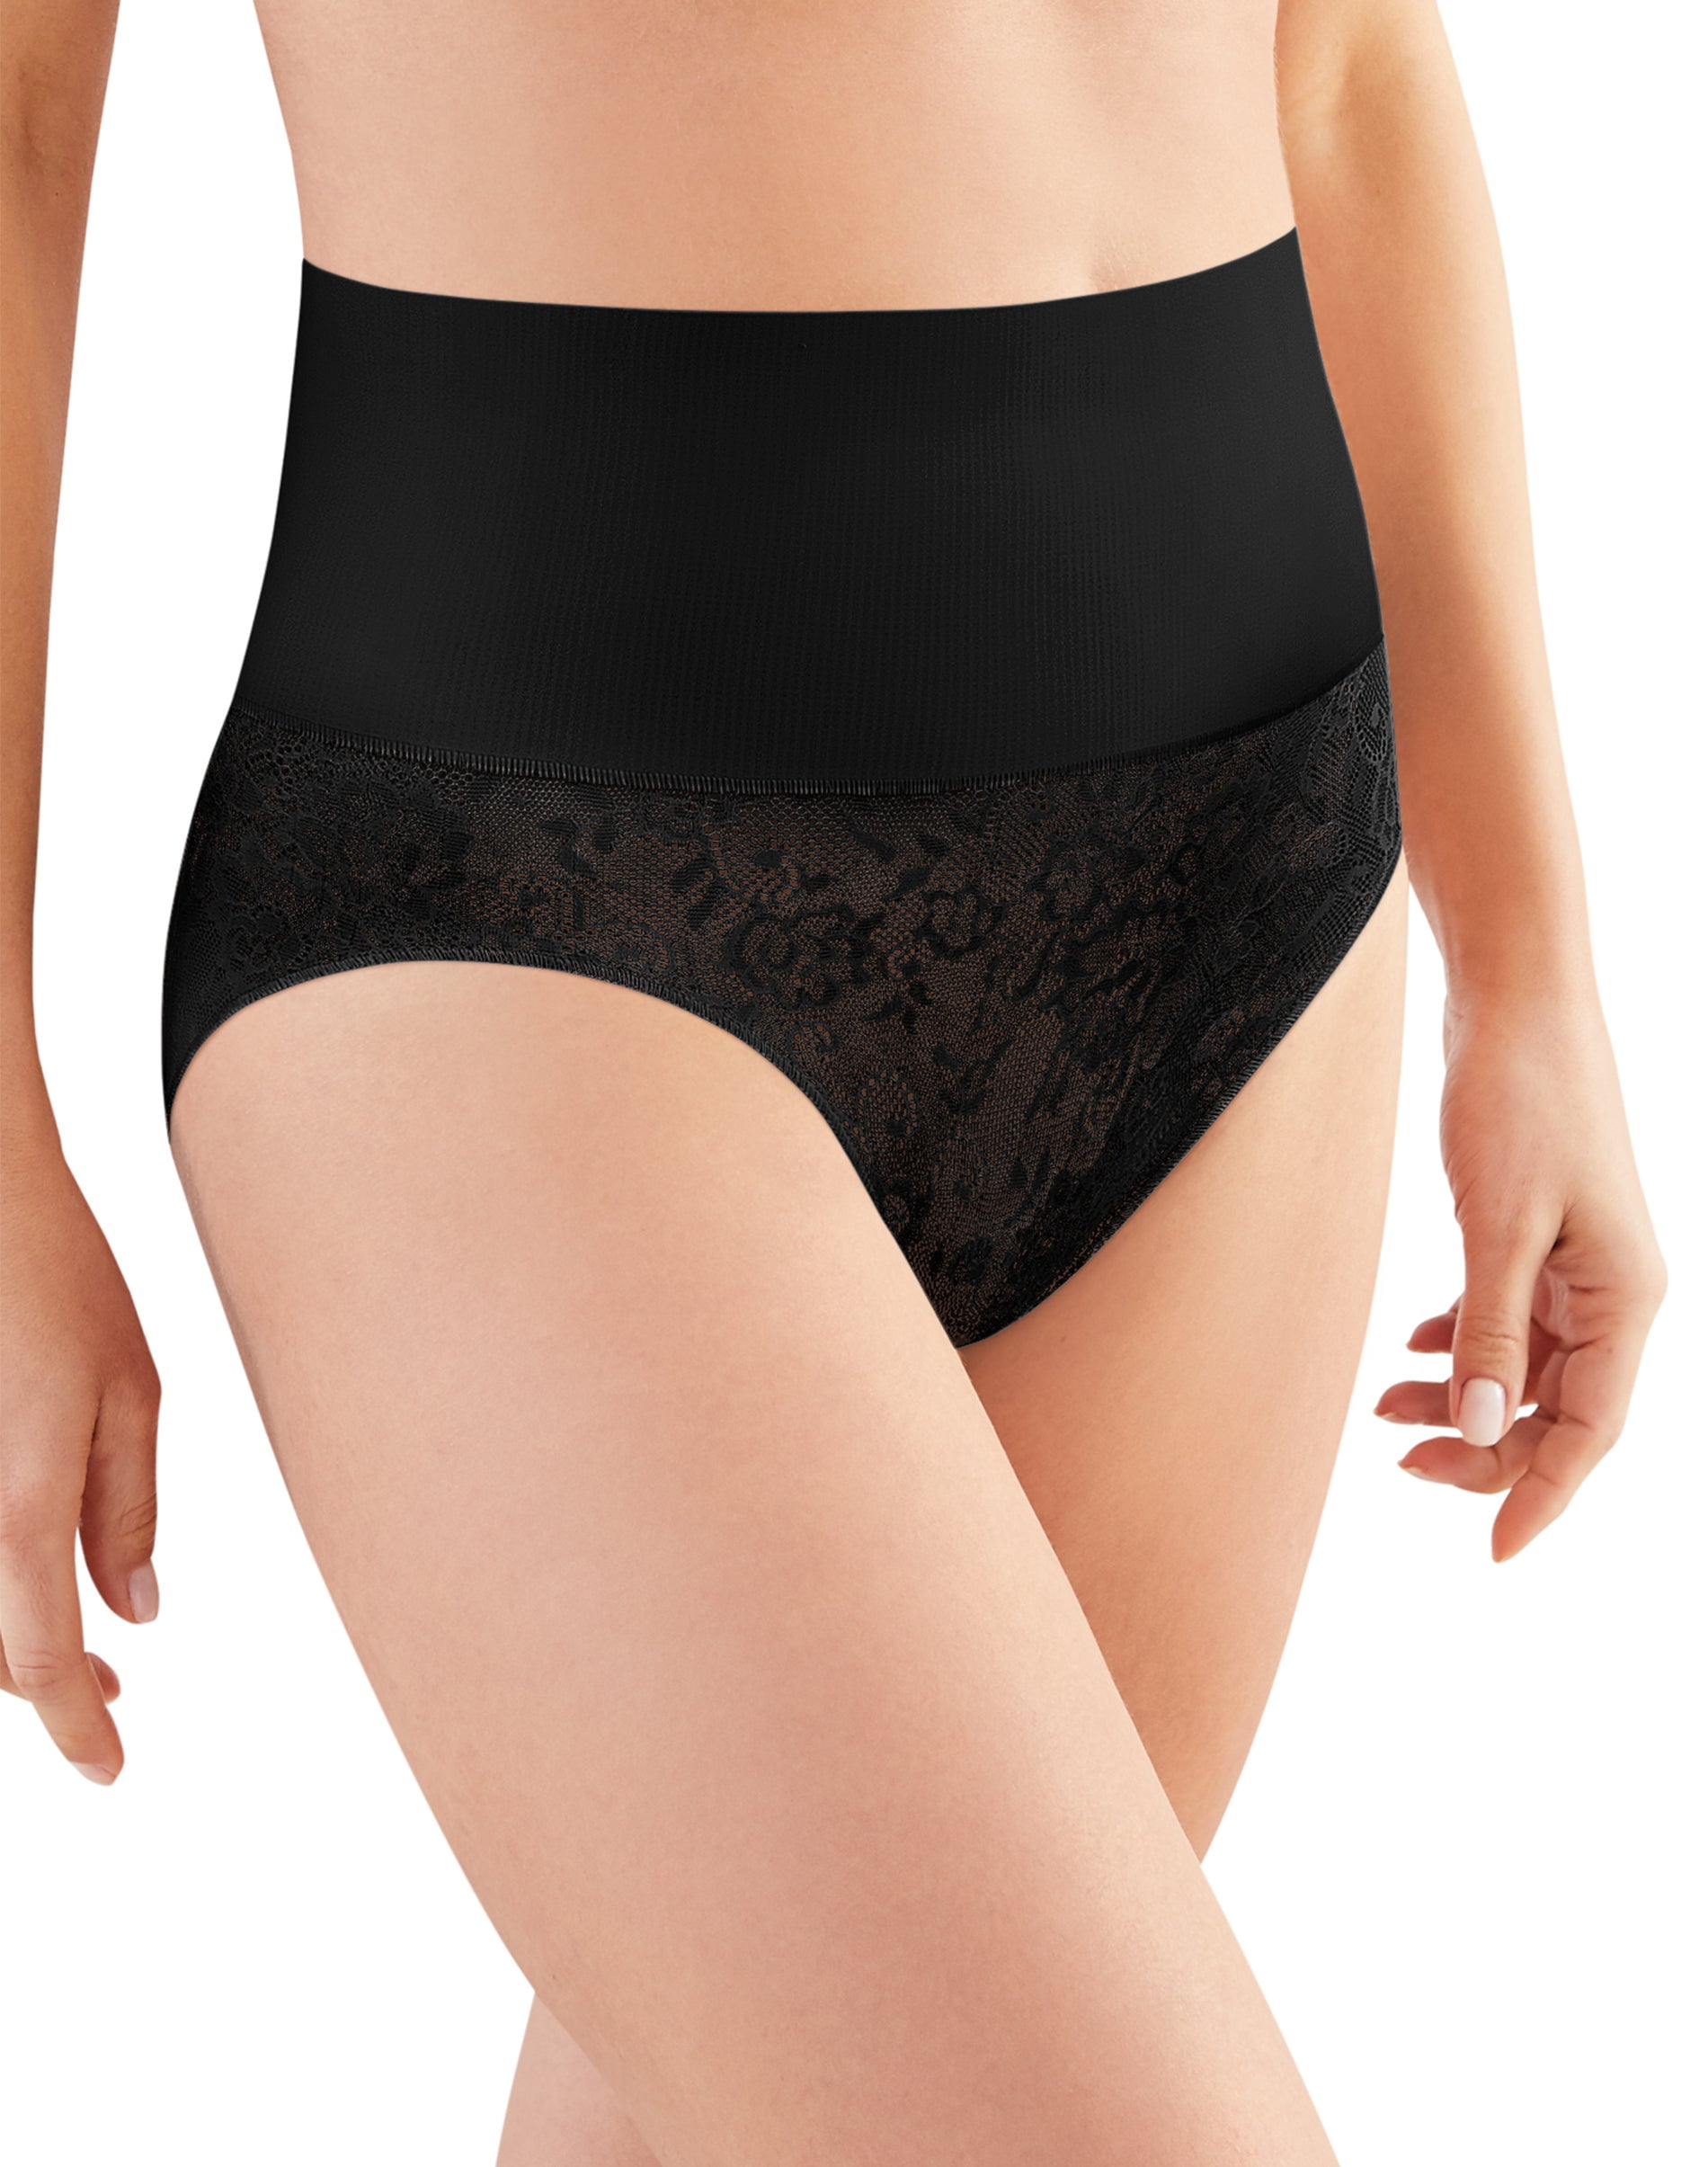 Maidenform Firm-Control Shaping Brief Black Lace XL Women's 